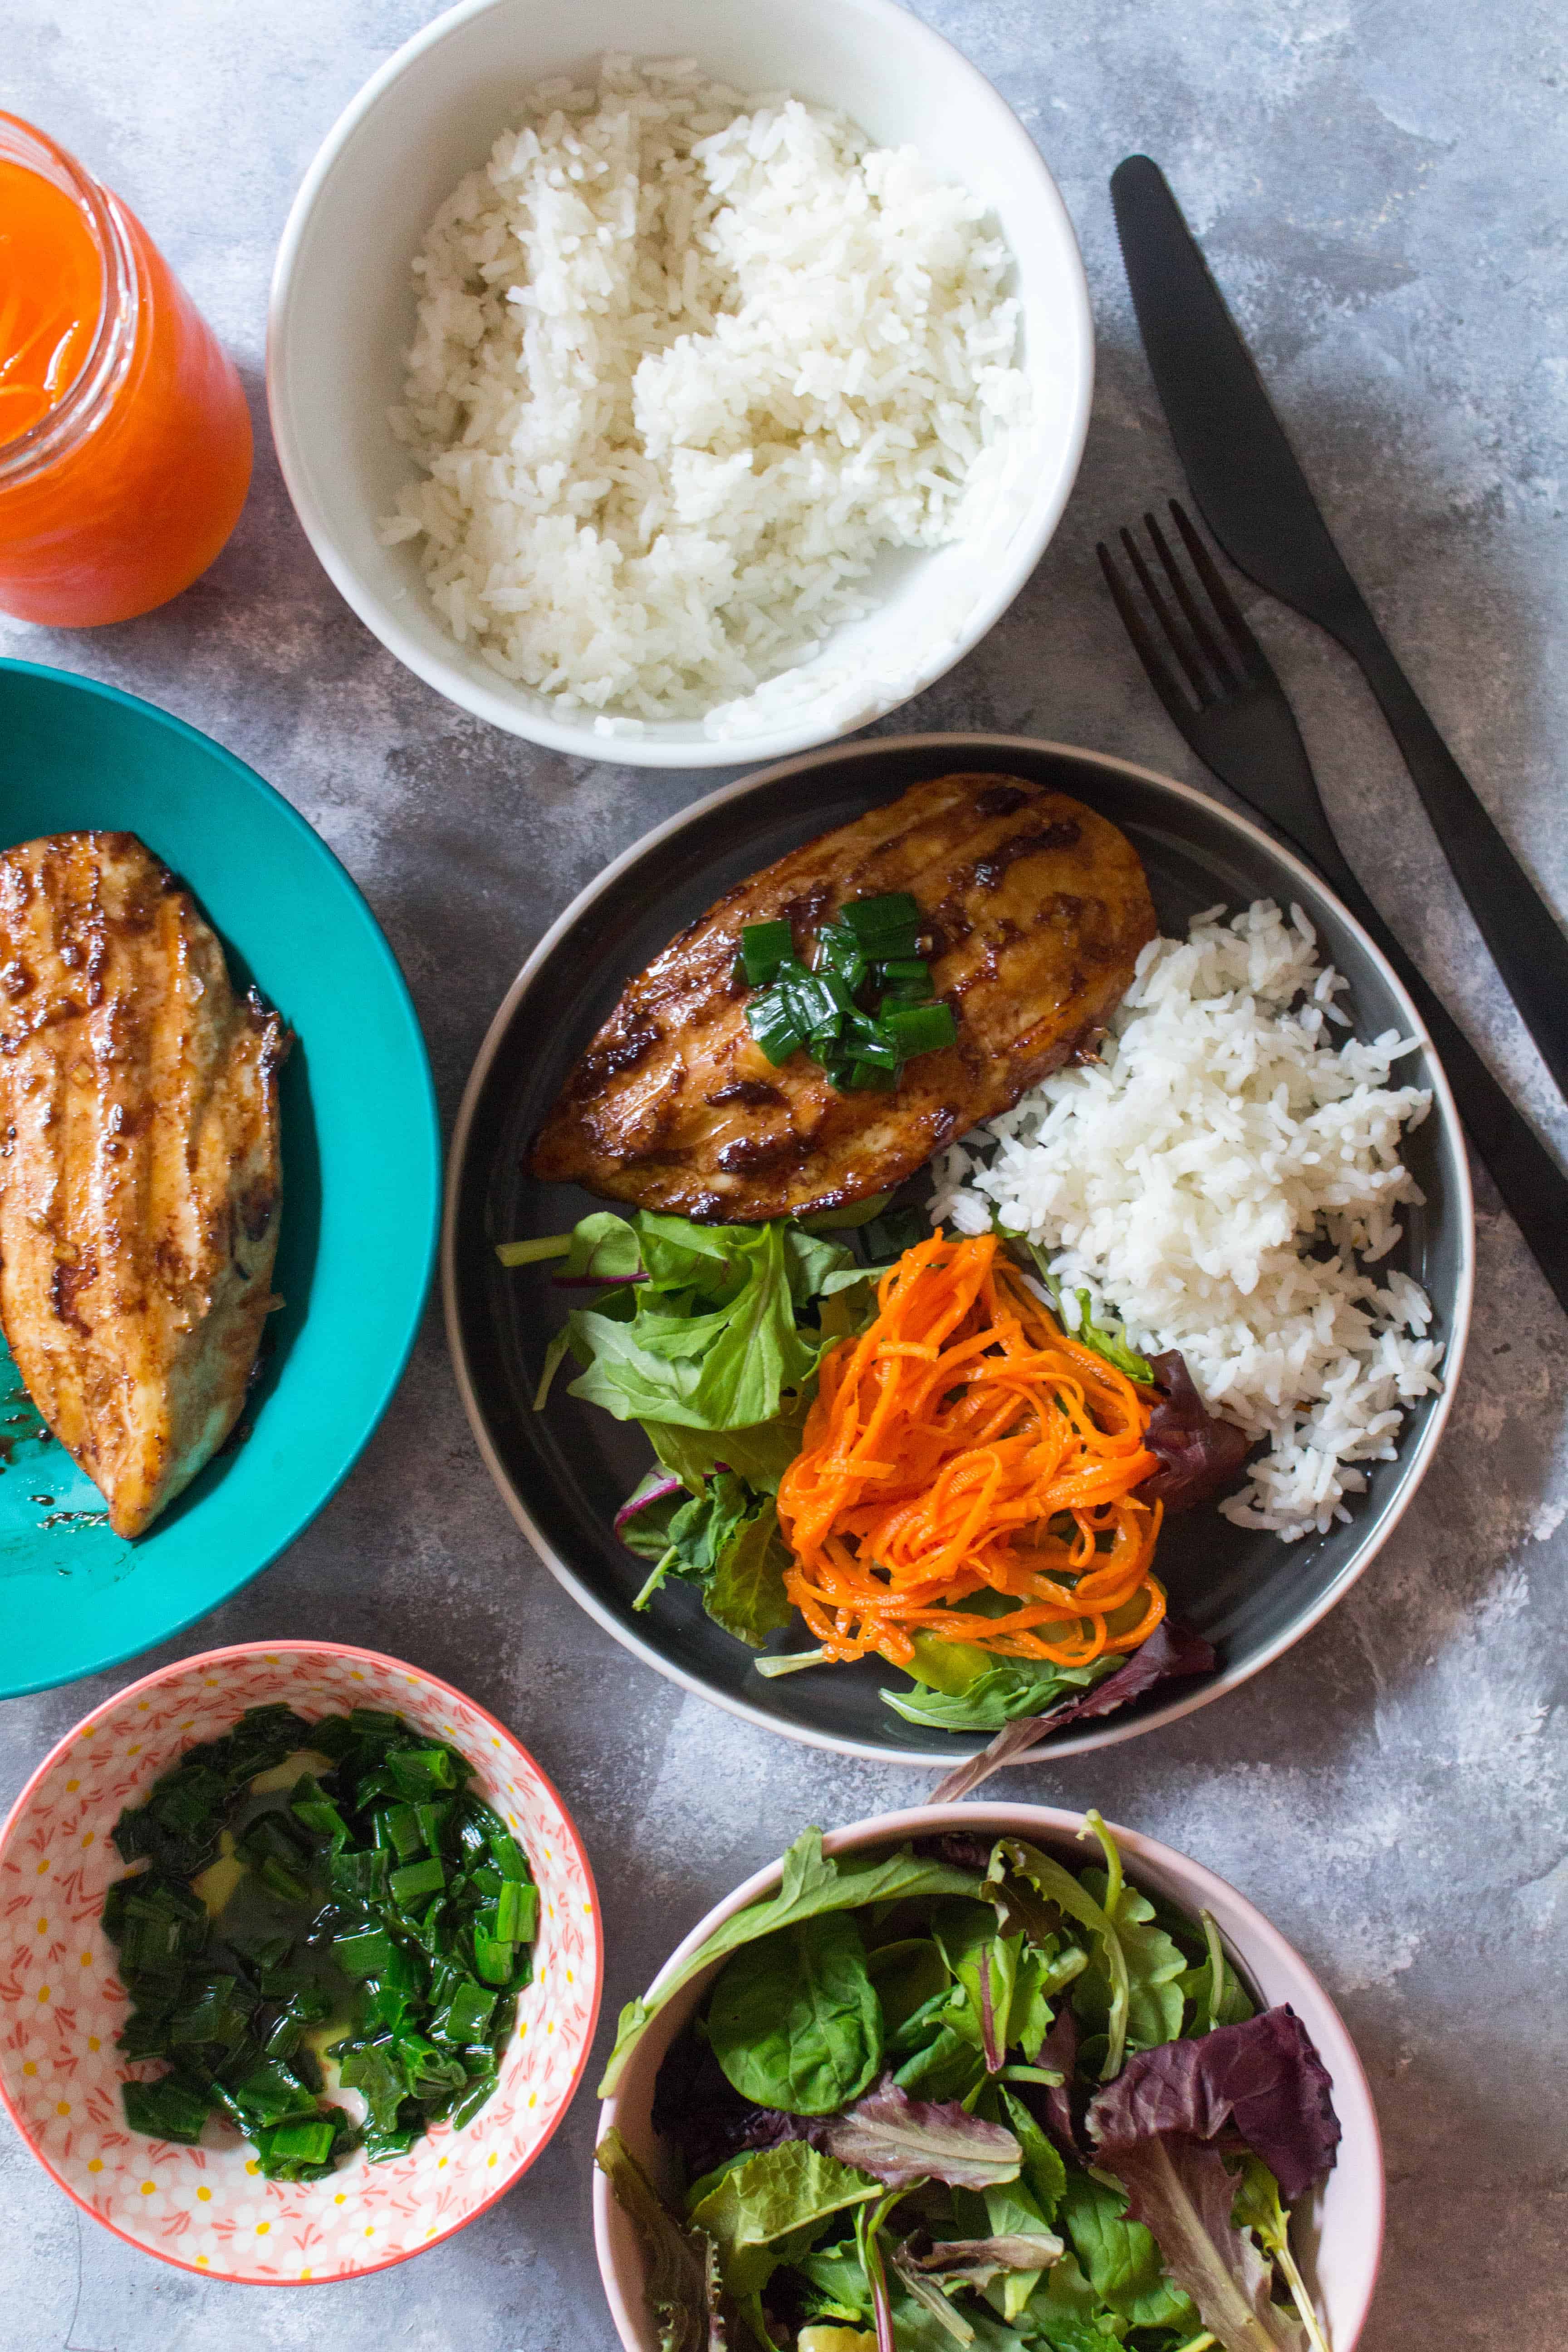 This Vietnamese Grilled Chicken Meal Prep is jammed packed with a whole lotta flavour thanks to its flavourful marinade. This Vietnamese Grilled Chicken is perfect for either a meal prep or a weeknight dinner.